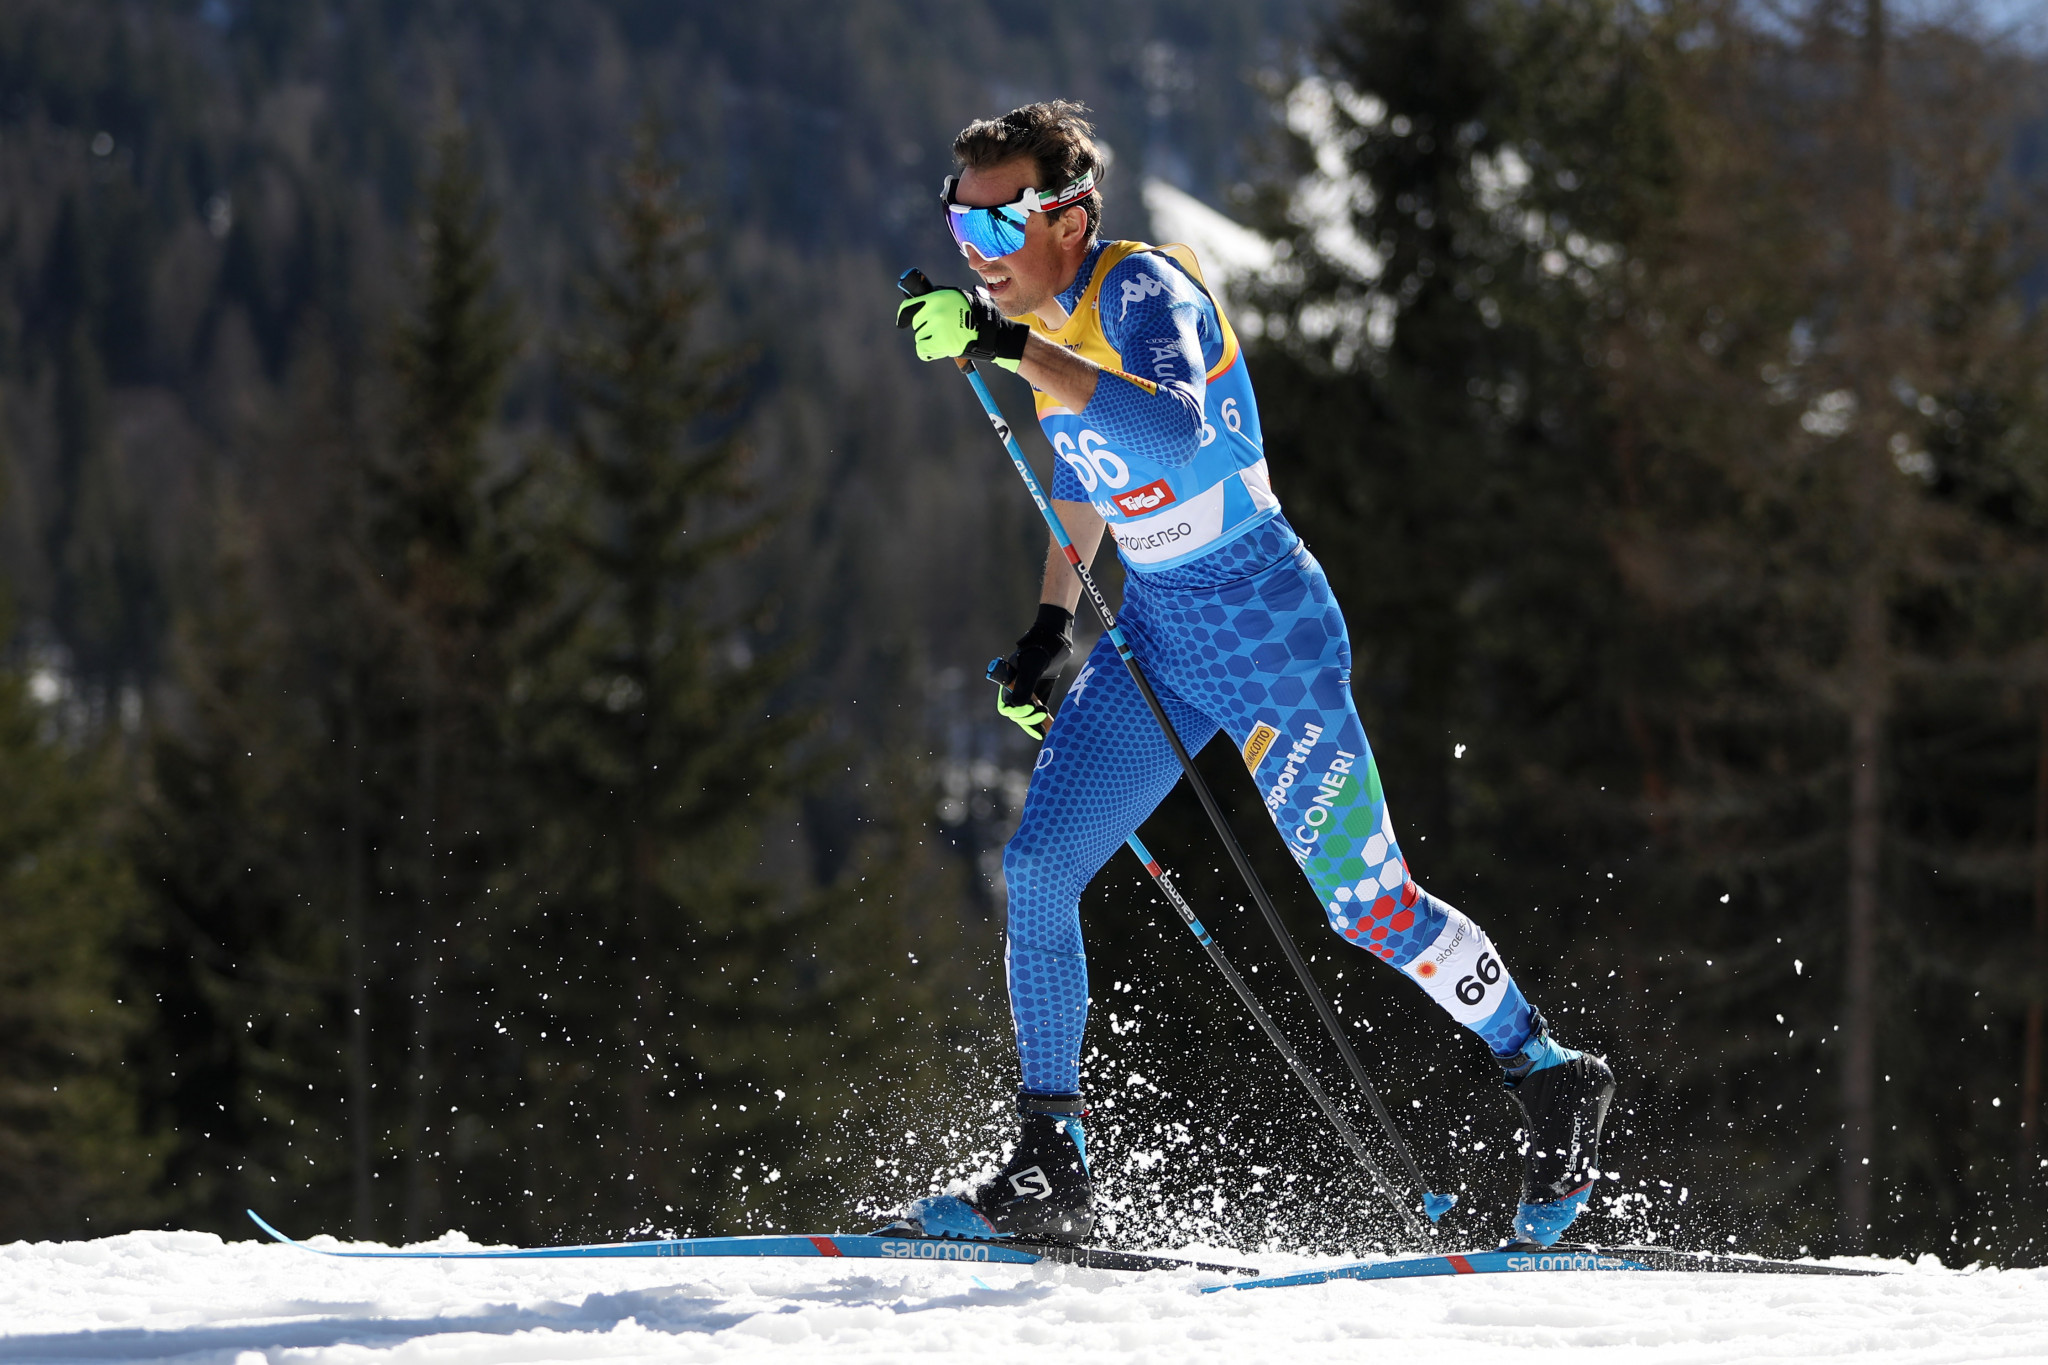 Francesco de Fabiani believes linking up with the Russian team will help him to develop as a cross-country skier ©Getty Images